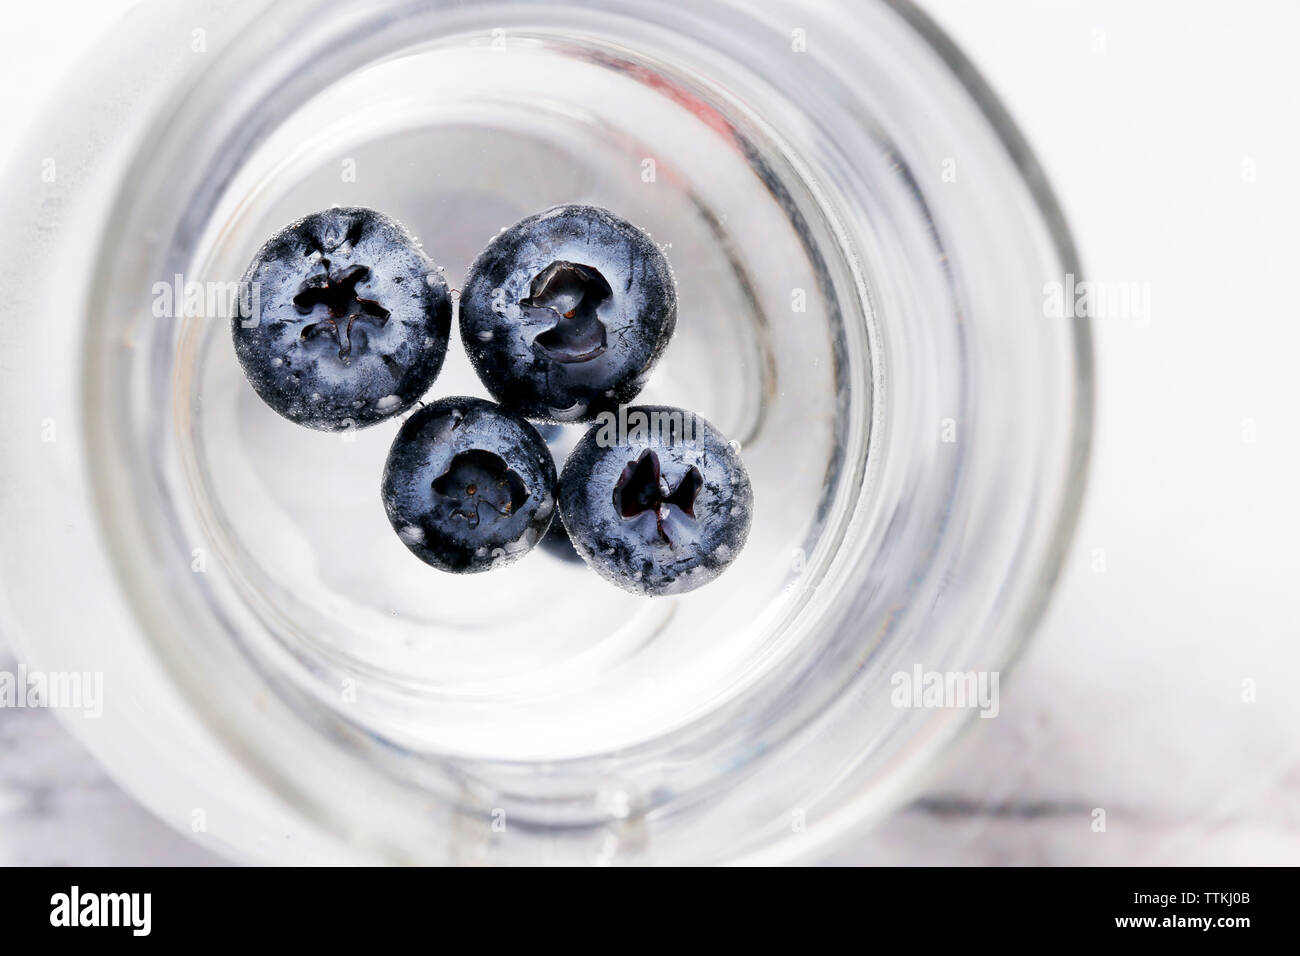 Overhead view of blueberries in water jug on table Stock Photo